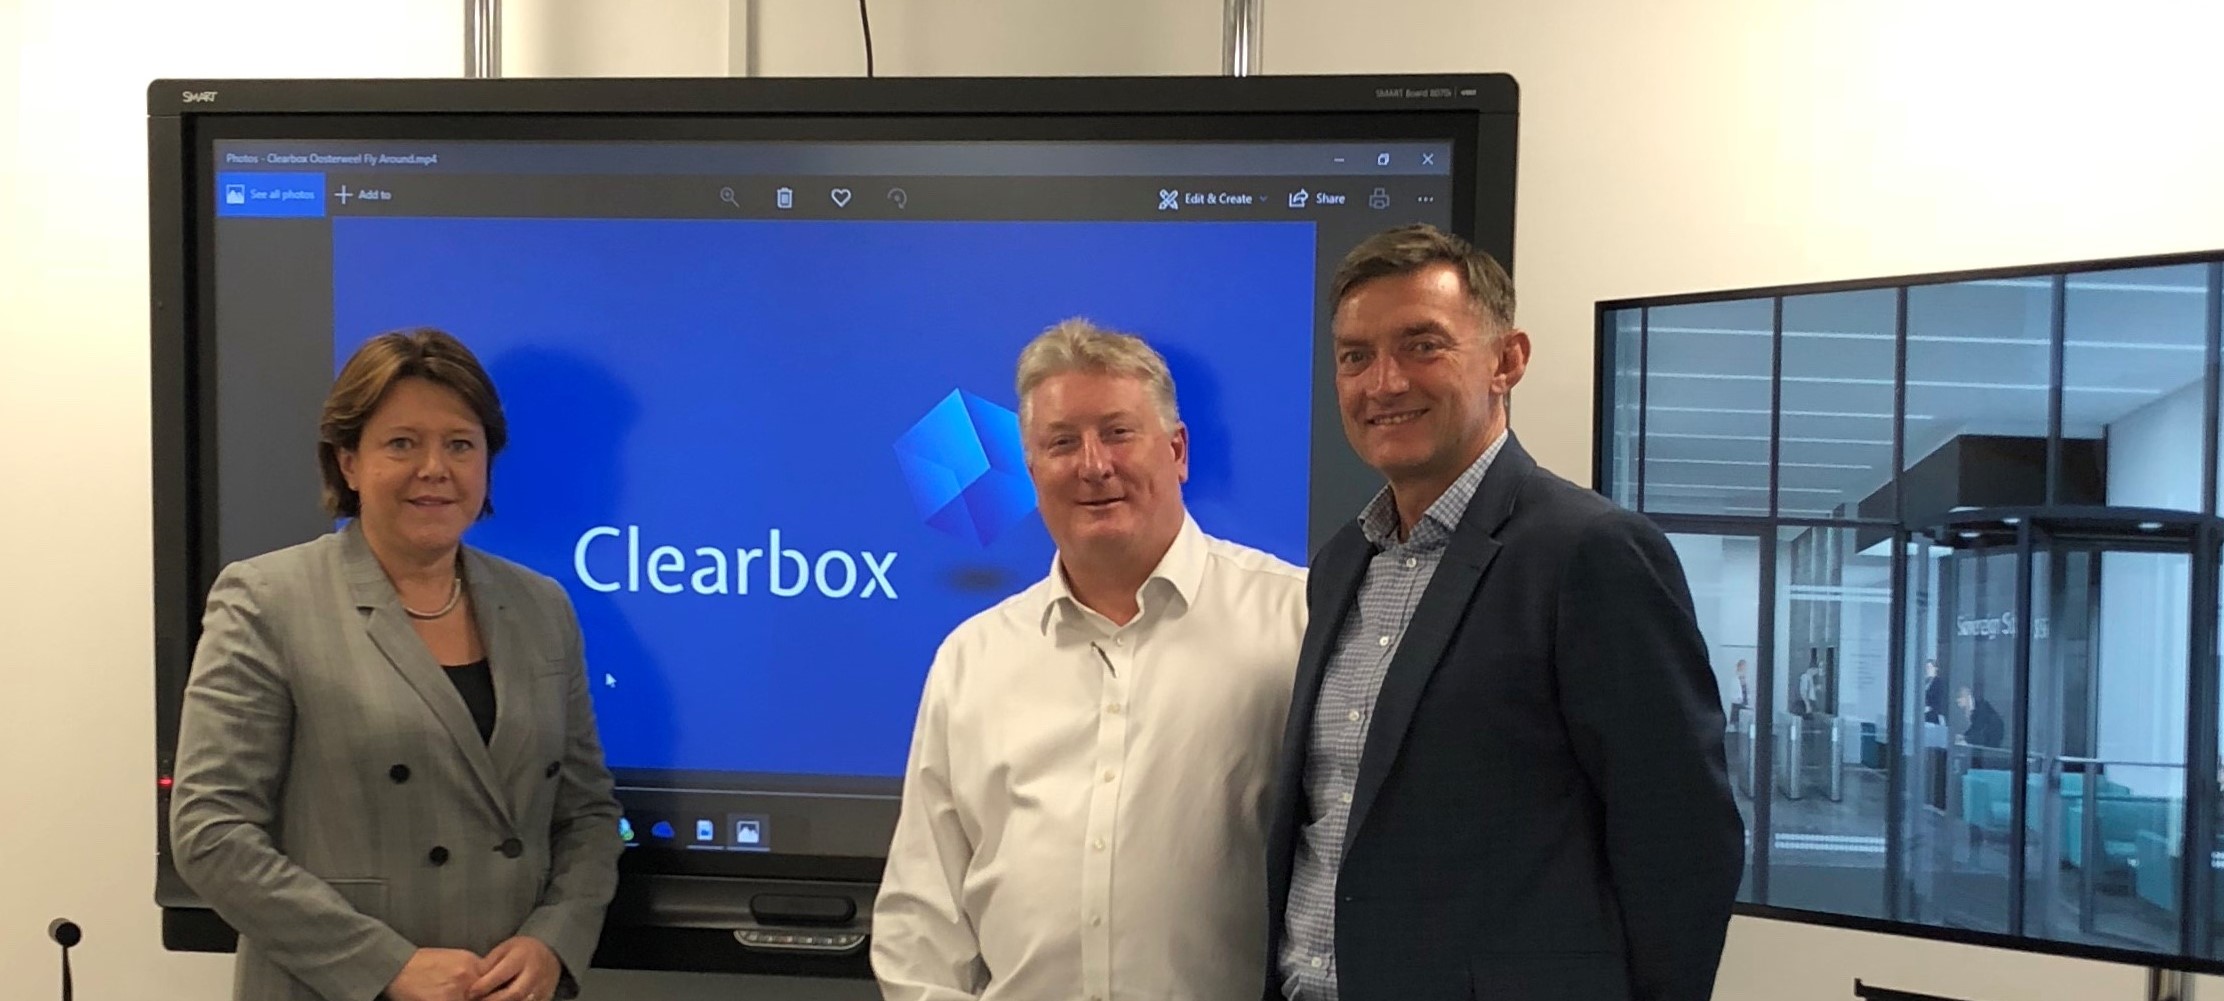 Maria Miller MP visits Clearbox